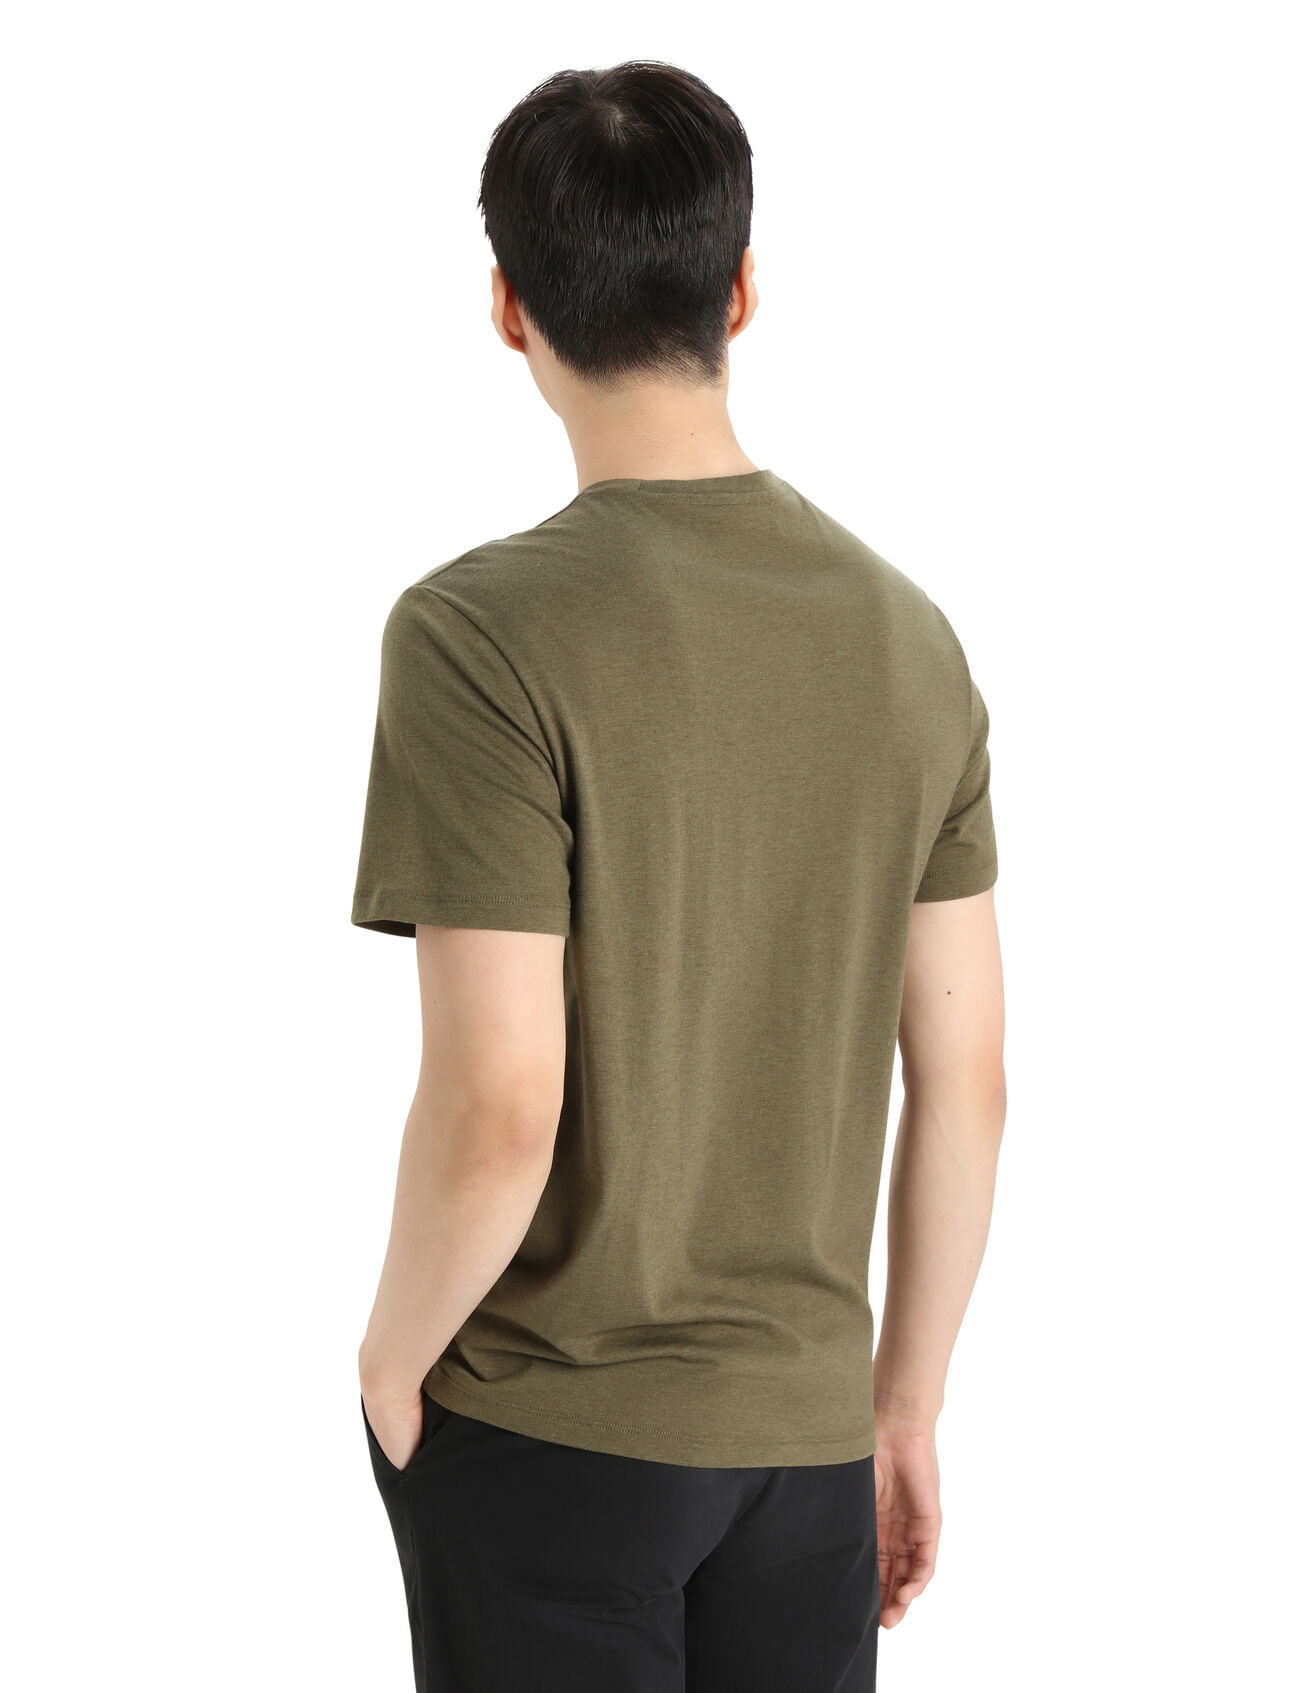 M Central Classic Ss Tee-loden Green - Welcome to Apple Saddlery |  www.applesaddlery.com | Family Owned Since 1972